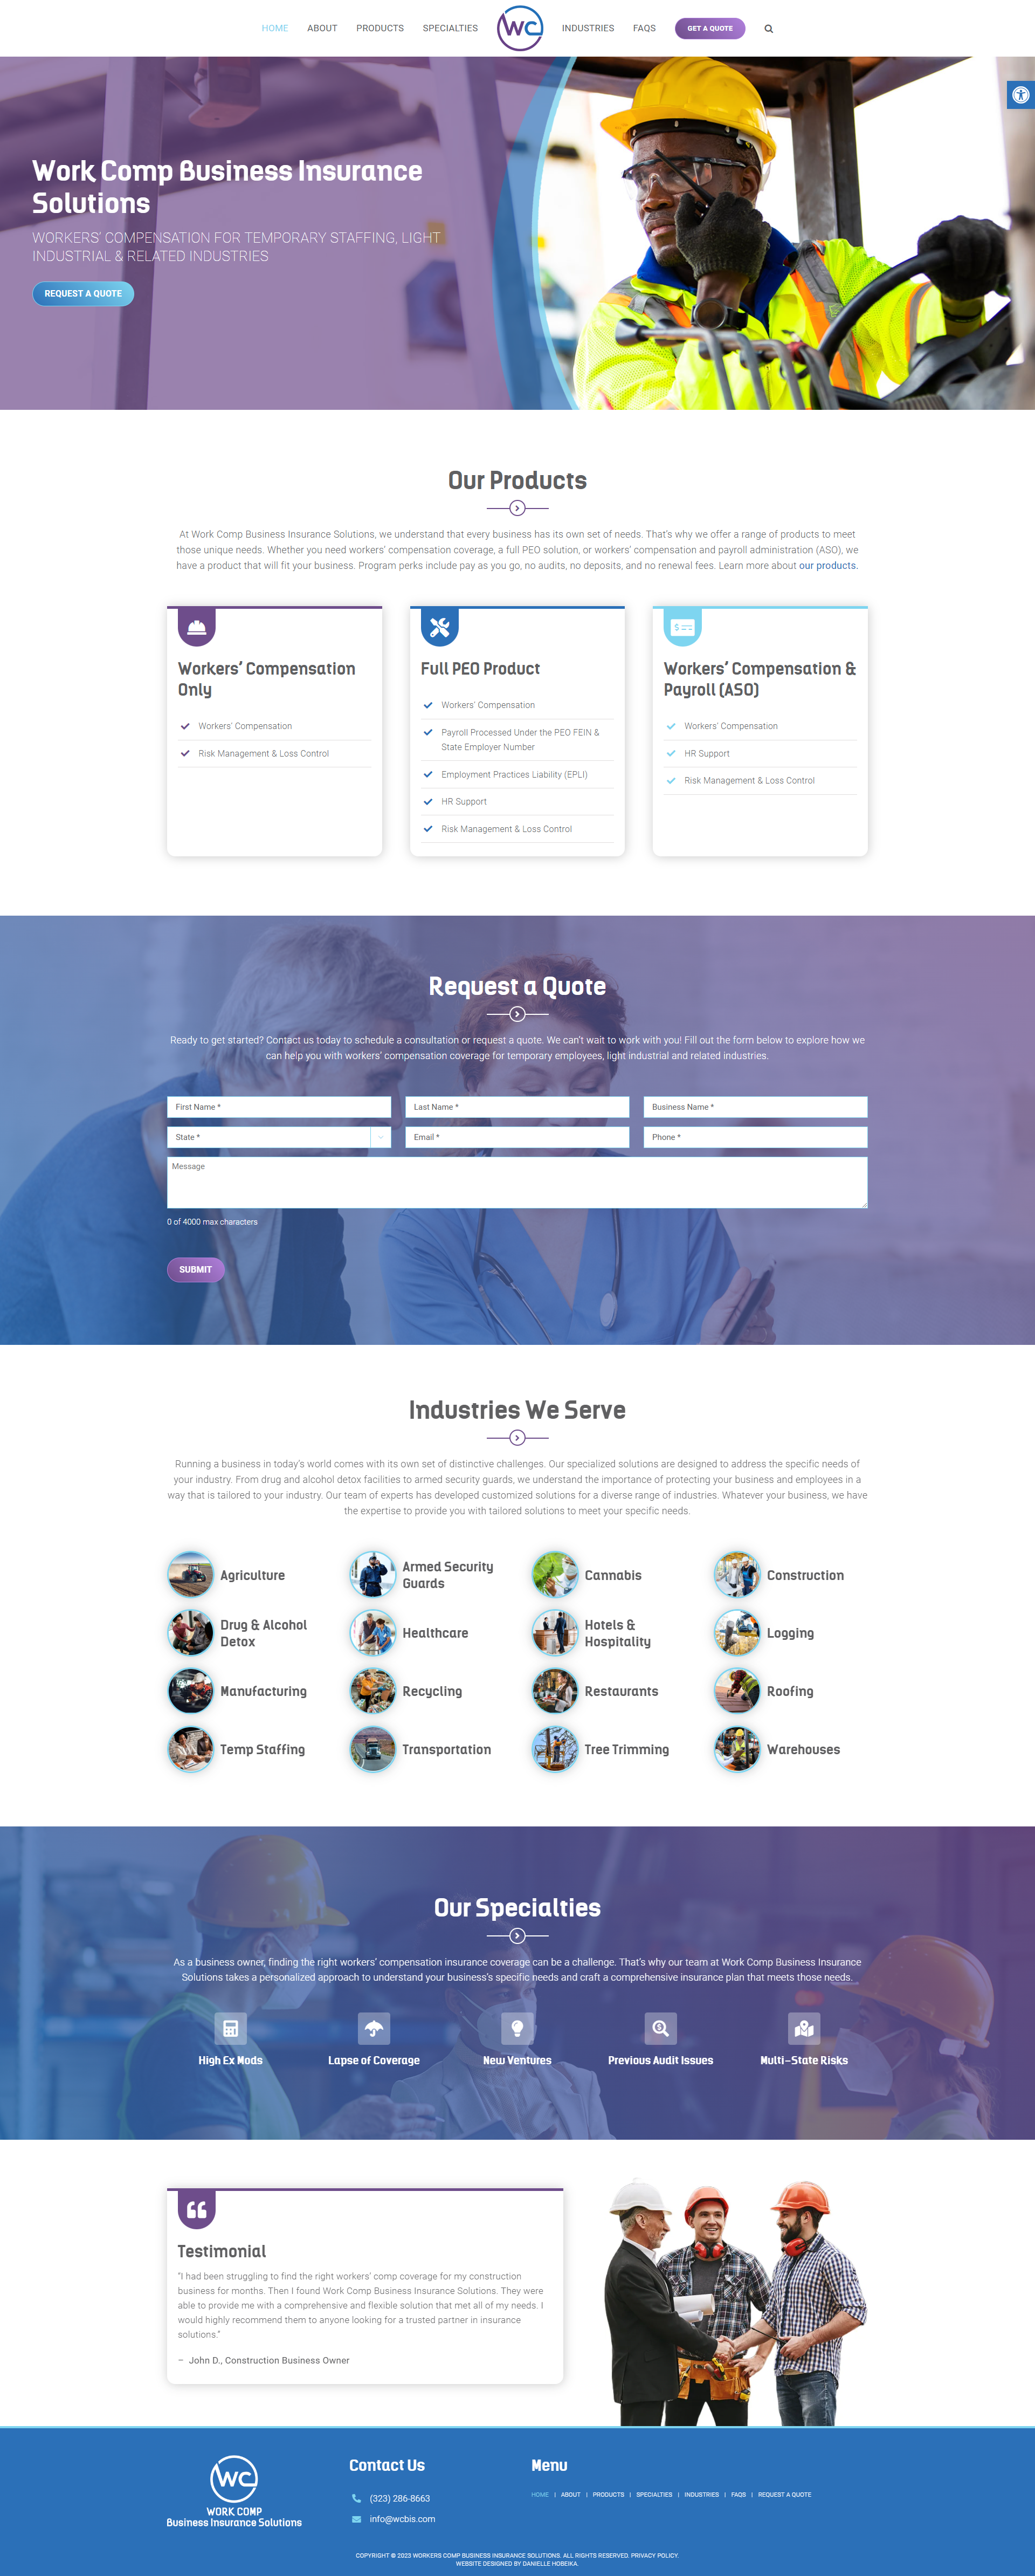 Web Design for Work Comp Business Insurance Solutions